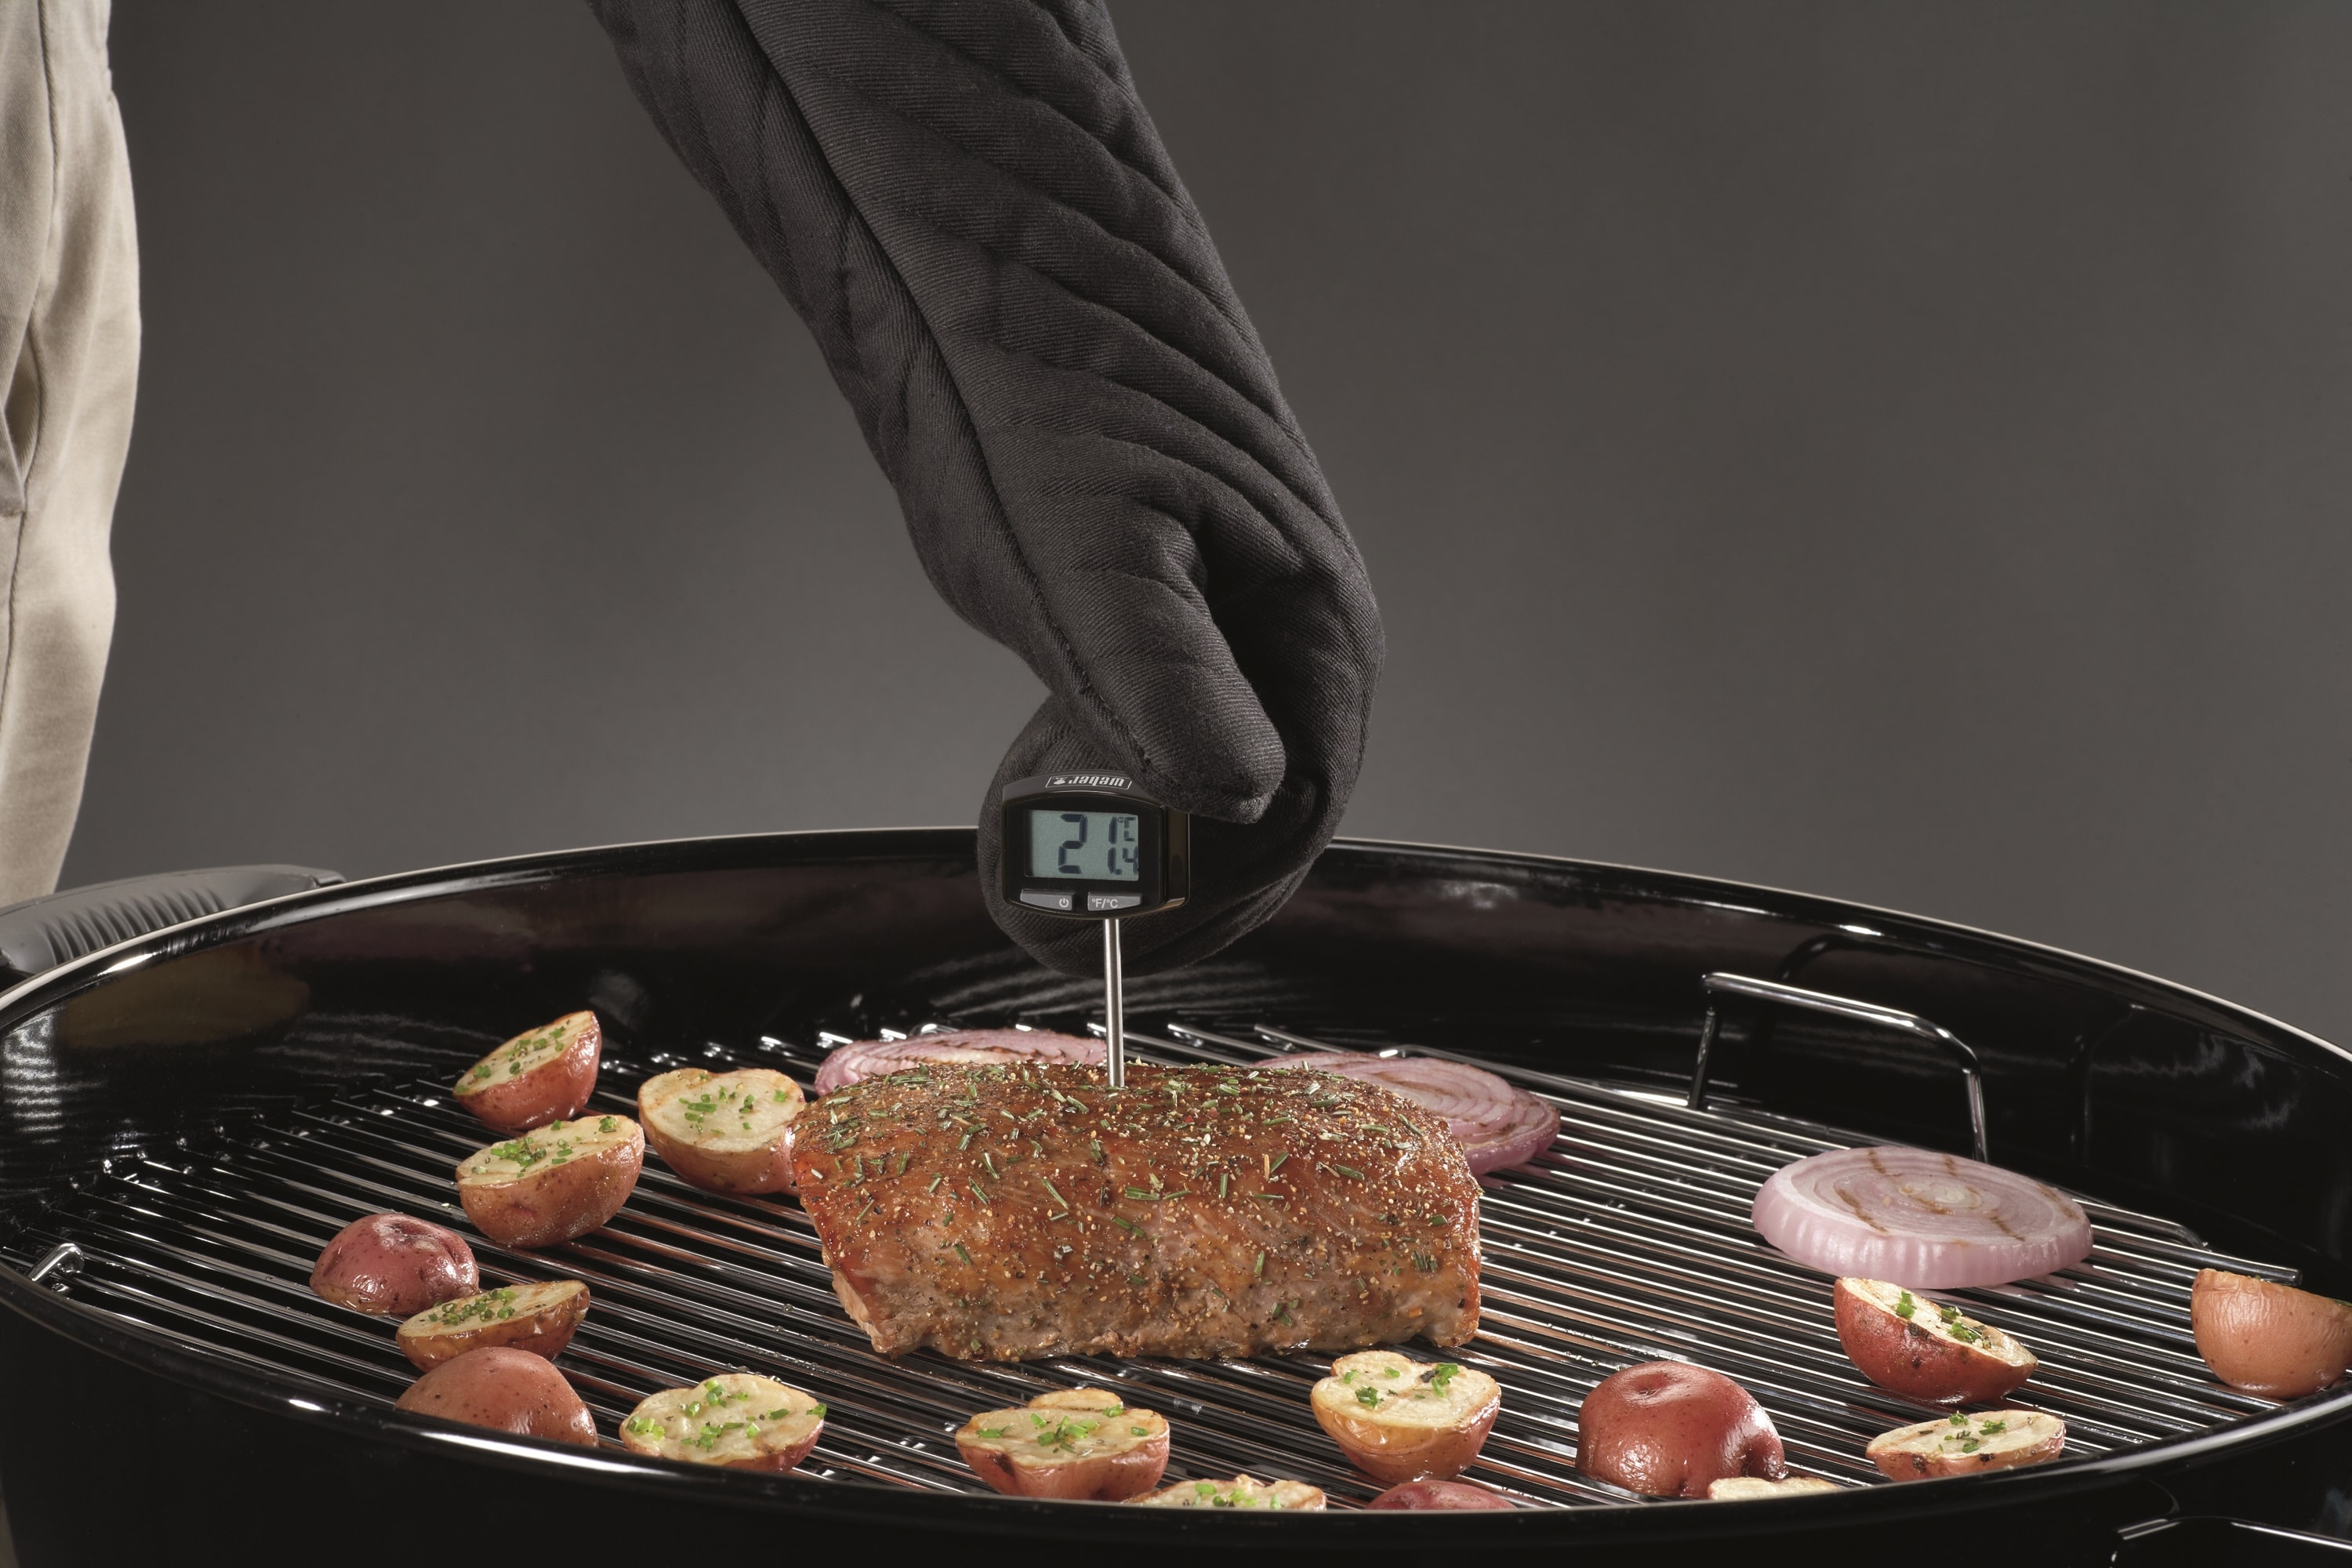 Weber Analog Probe Meat Thermometer at